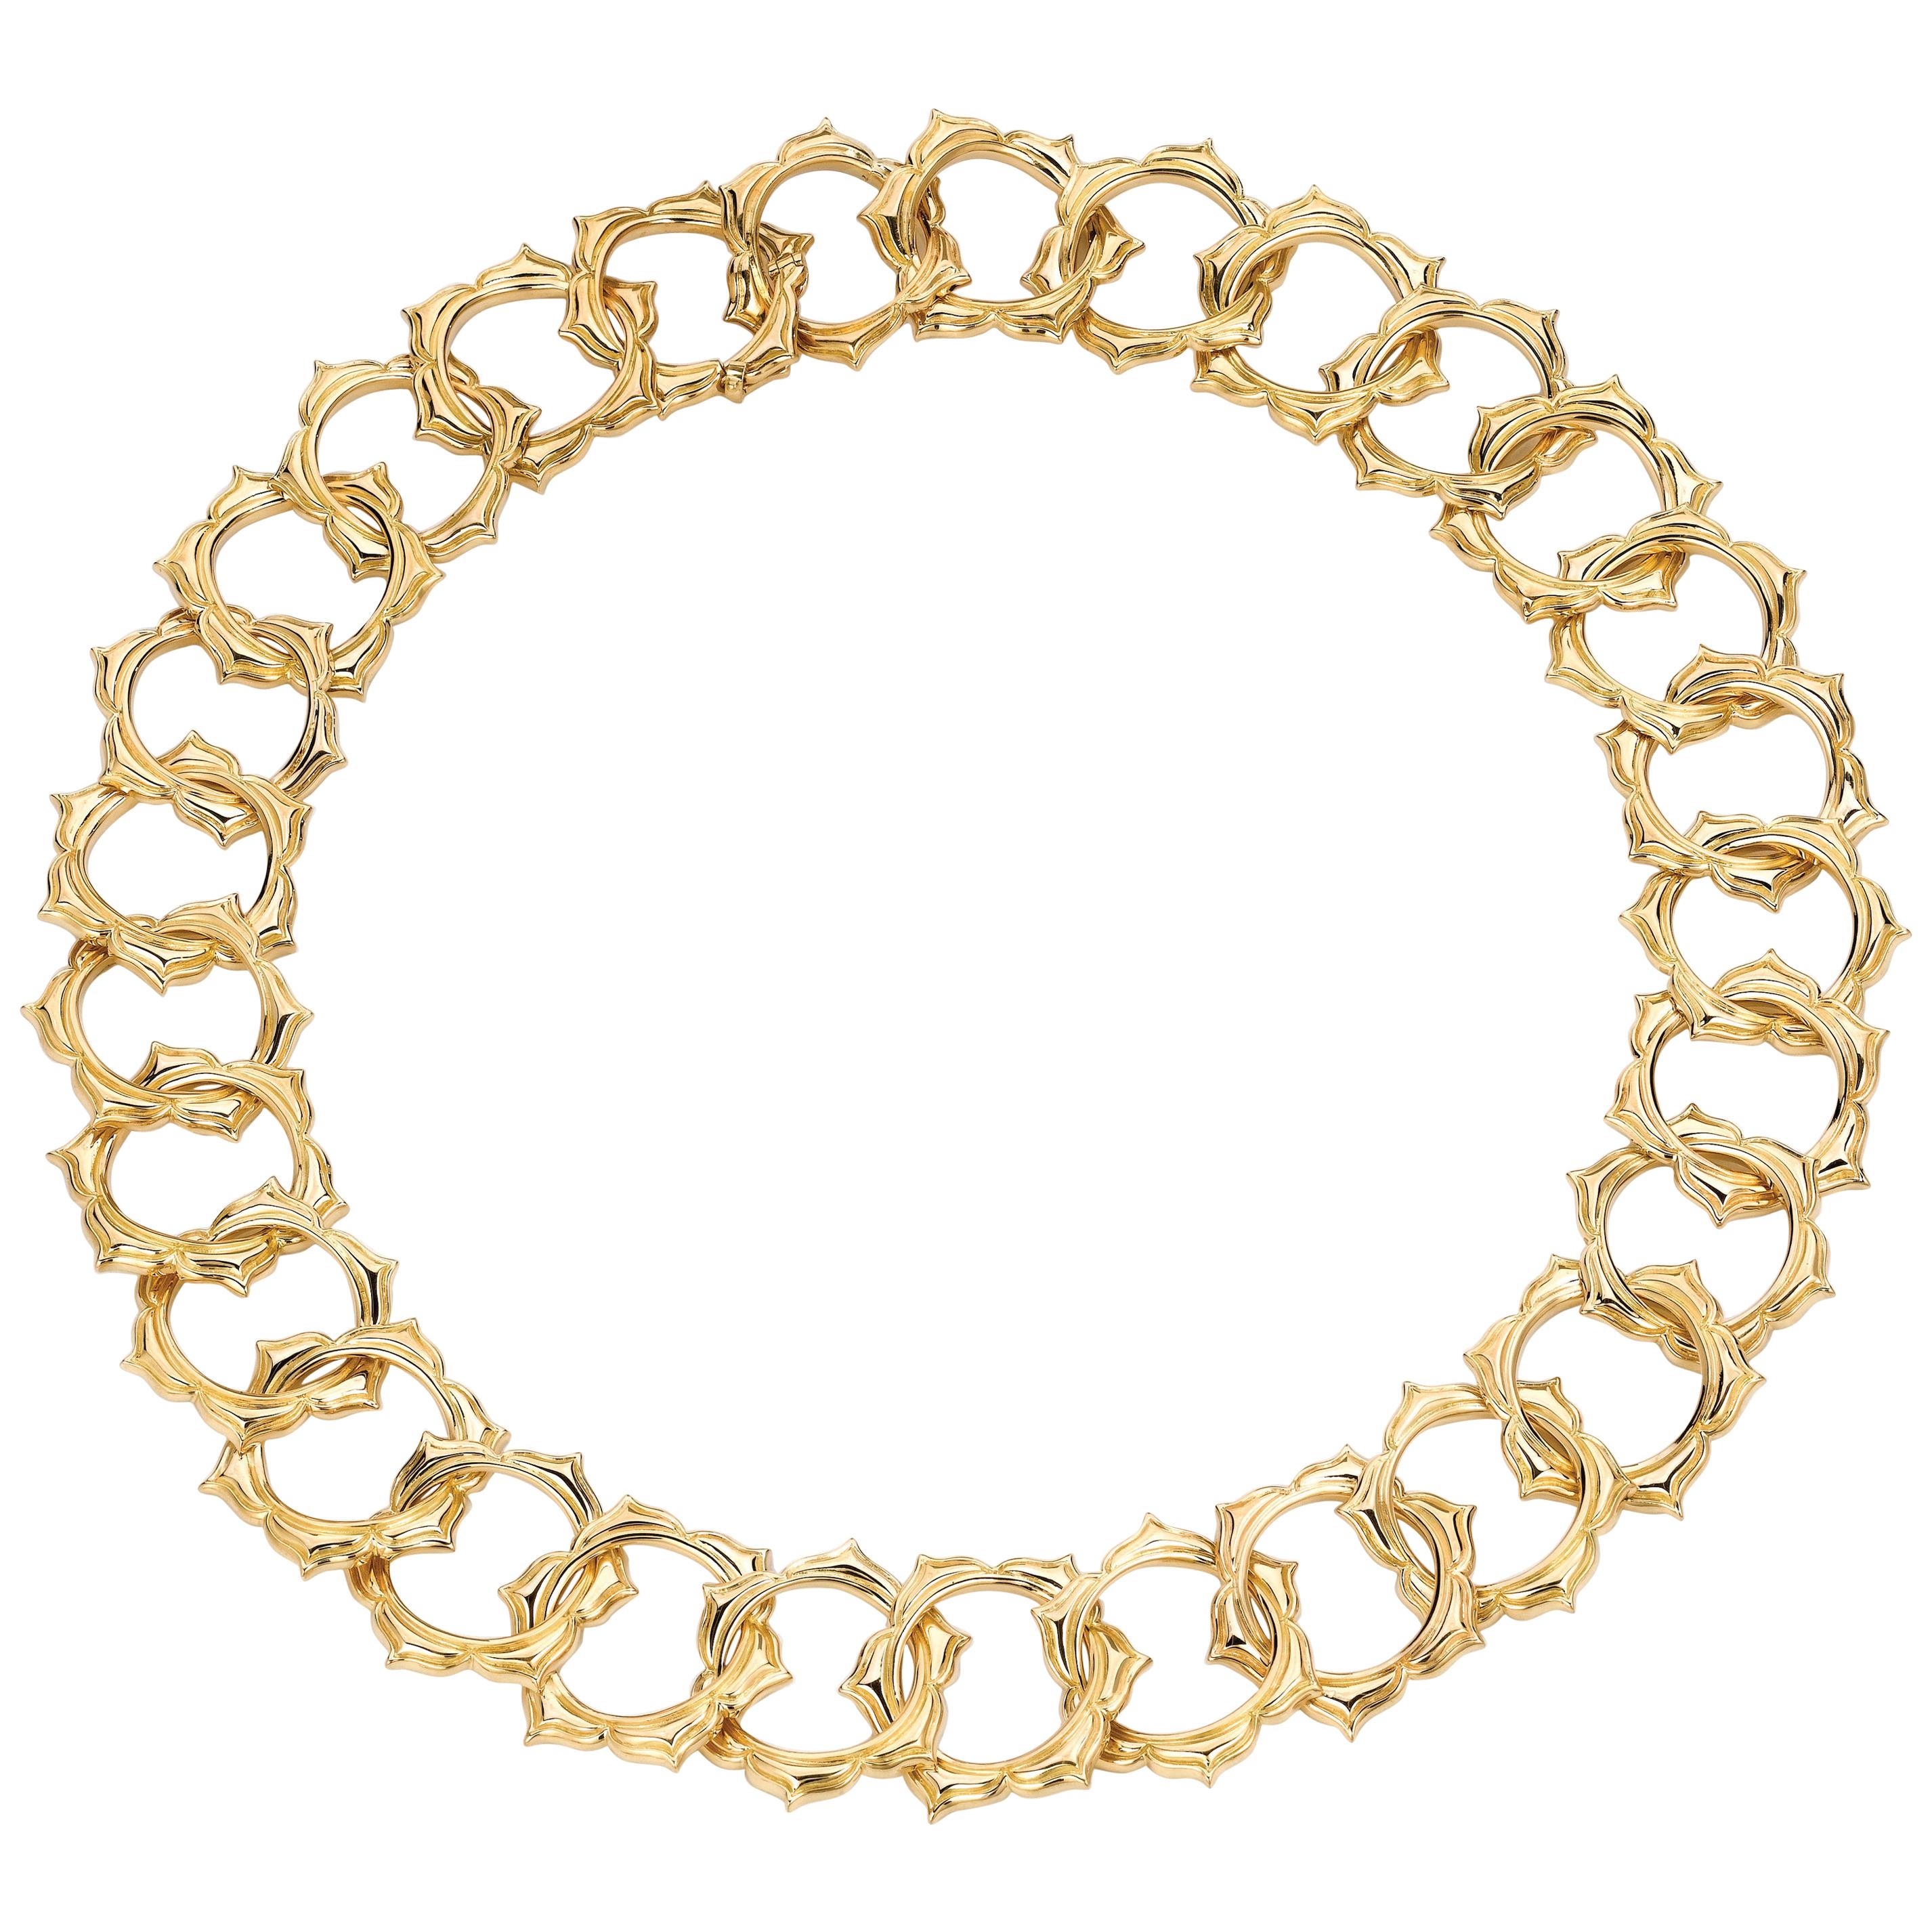 18 Karat Yellow Gold Necklace from the "Soleil" Collection by Gemlok